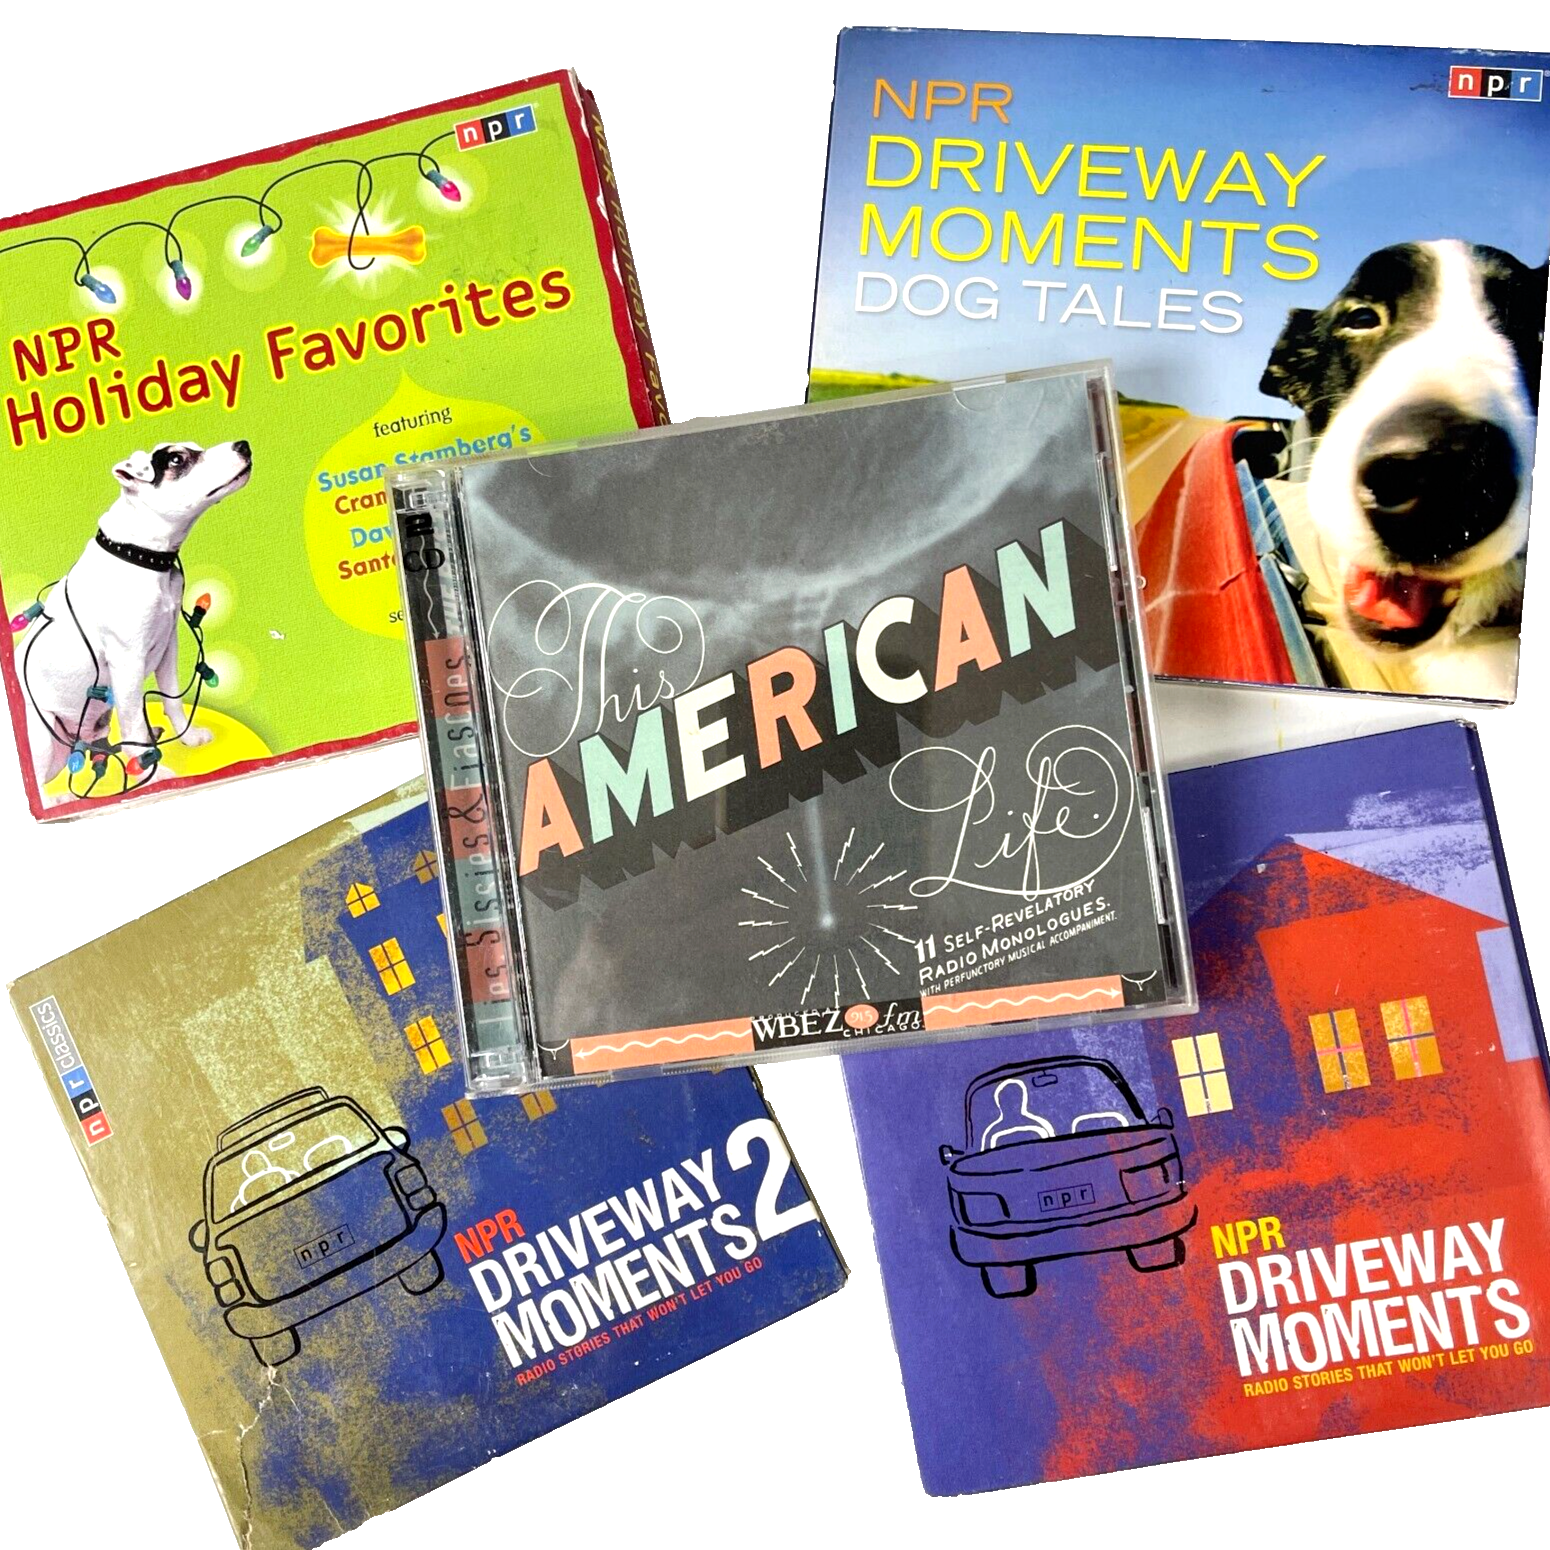 Primary image for NPR Driveway Moments This American Life 5 CD Bundle Holiday Favorites Dog Tales